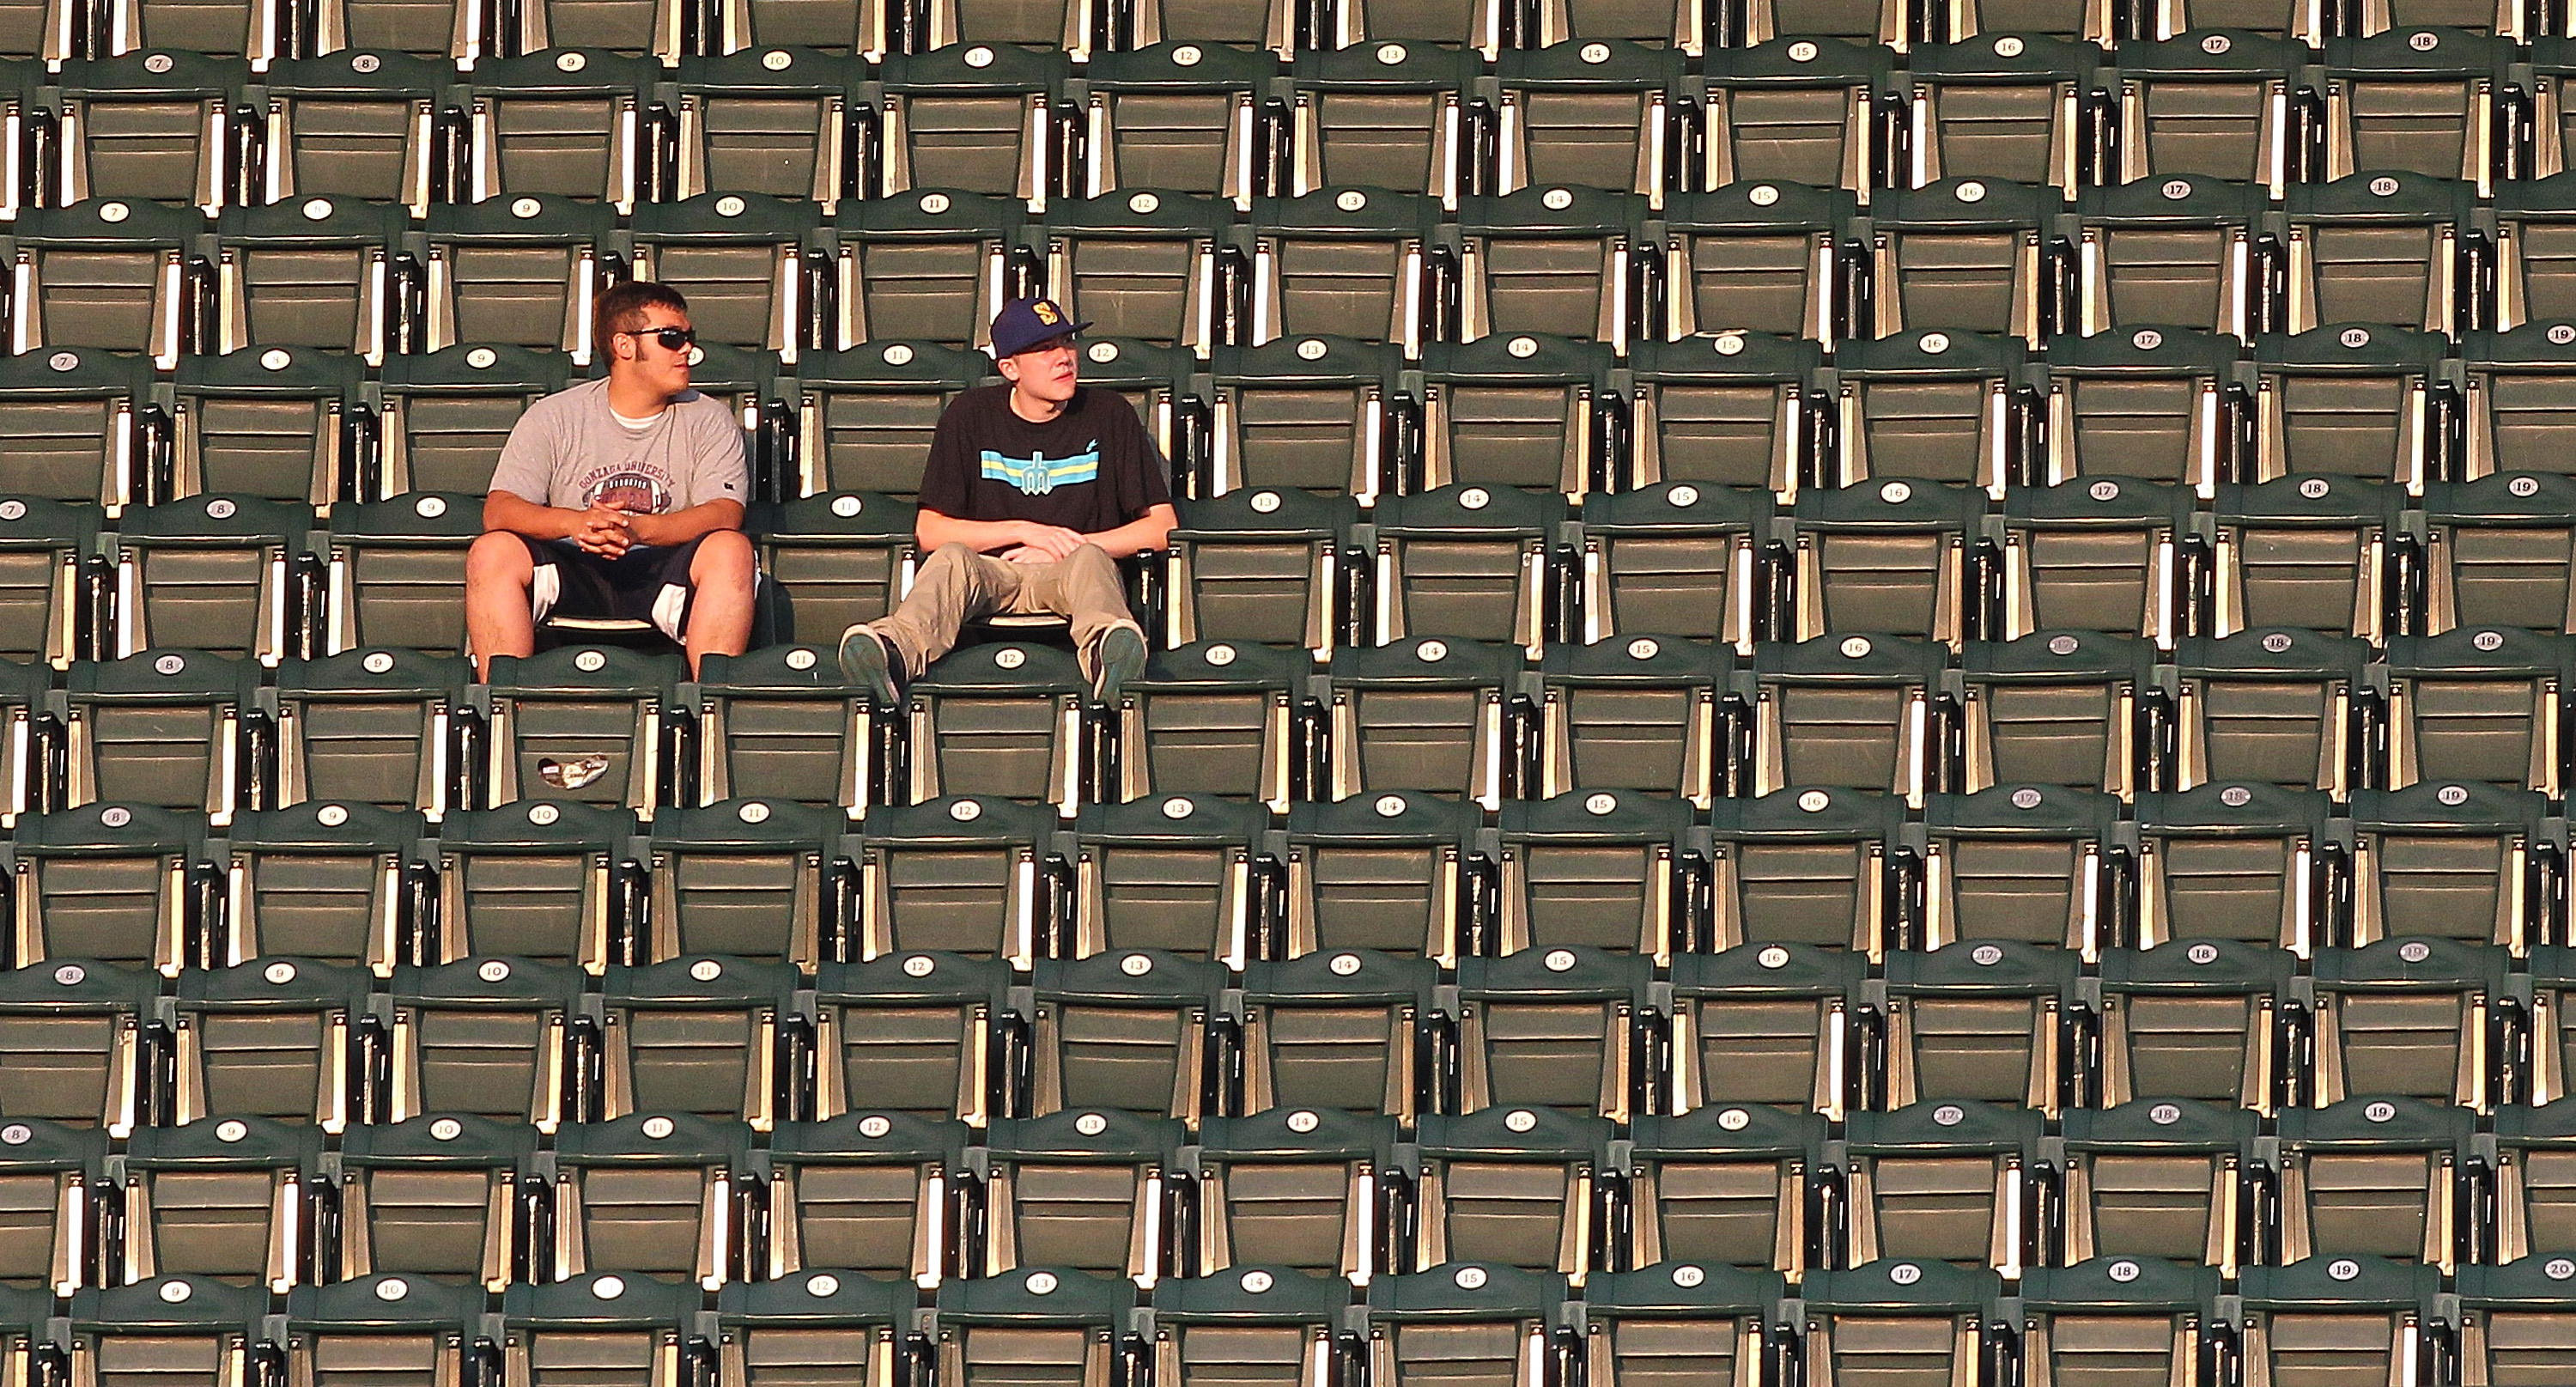 SEATTLE - AUGUST 03:  Seattle Mariners' fans watch the game against the Texas Rangers from the upper right field deck at Safeco Field on August 3, 2010 in Seattle, Washington. (Photo by Otto Greule Jr/Getty Images)